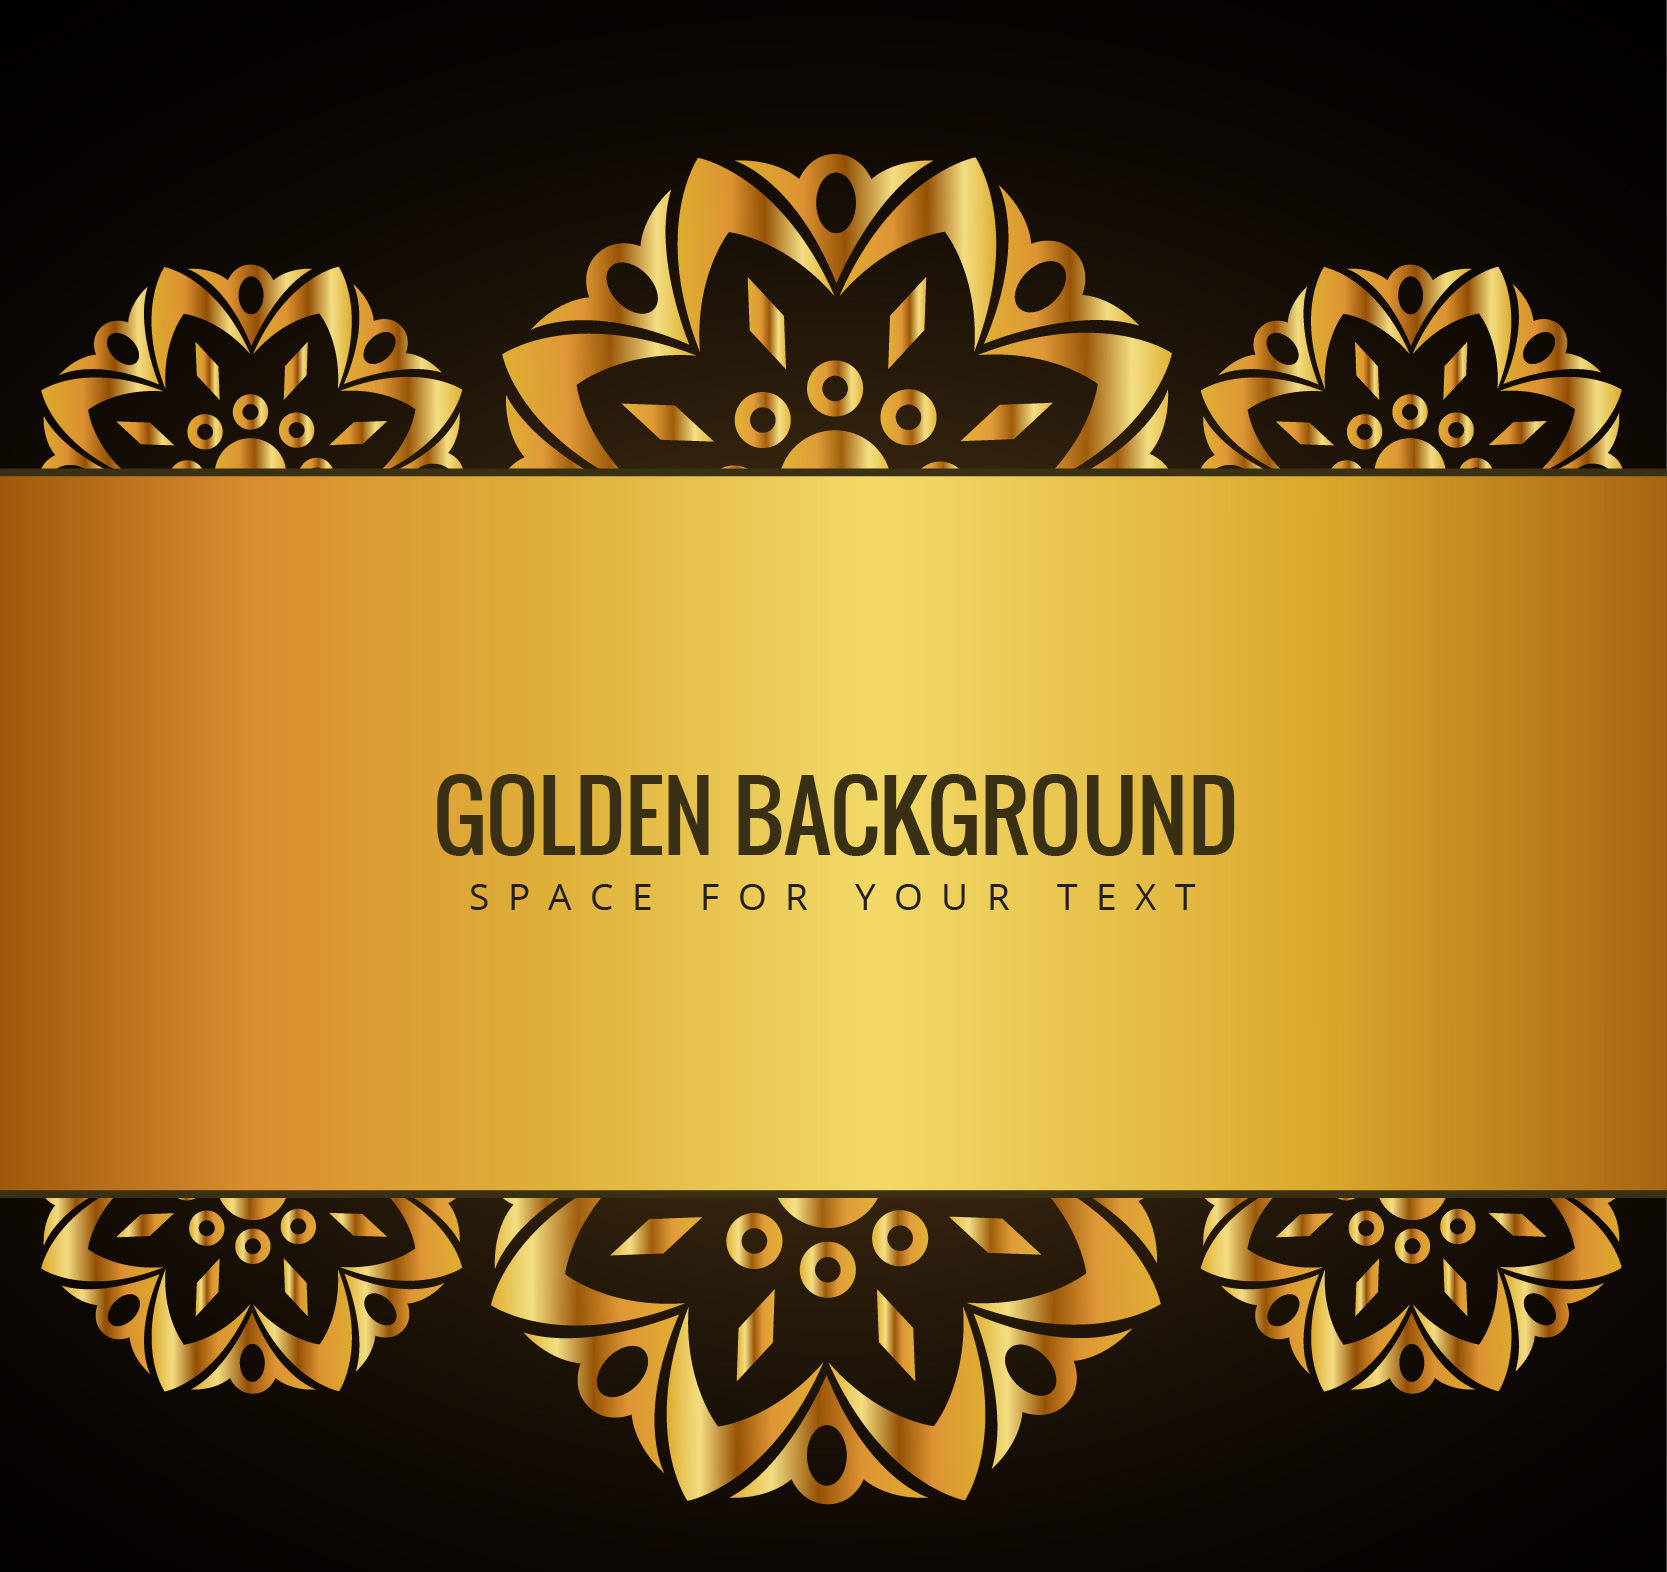 Golden Backgrounds with Ornaments